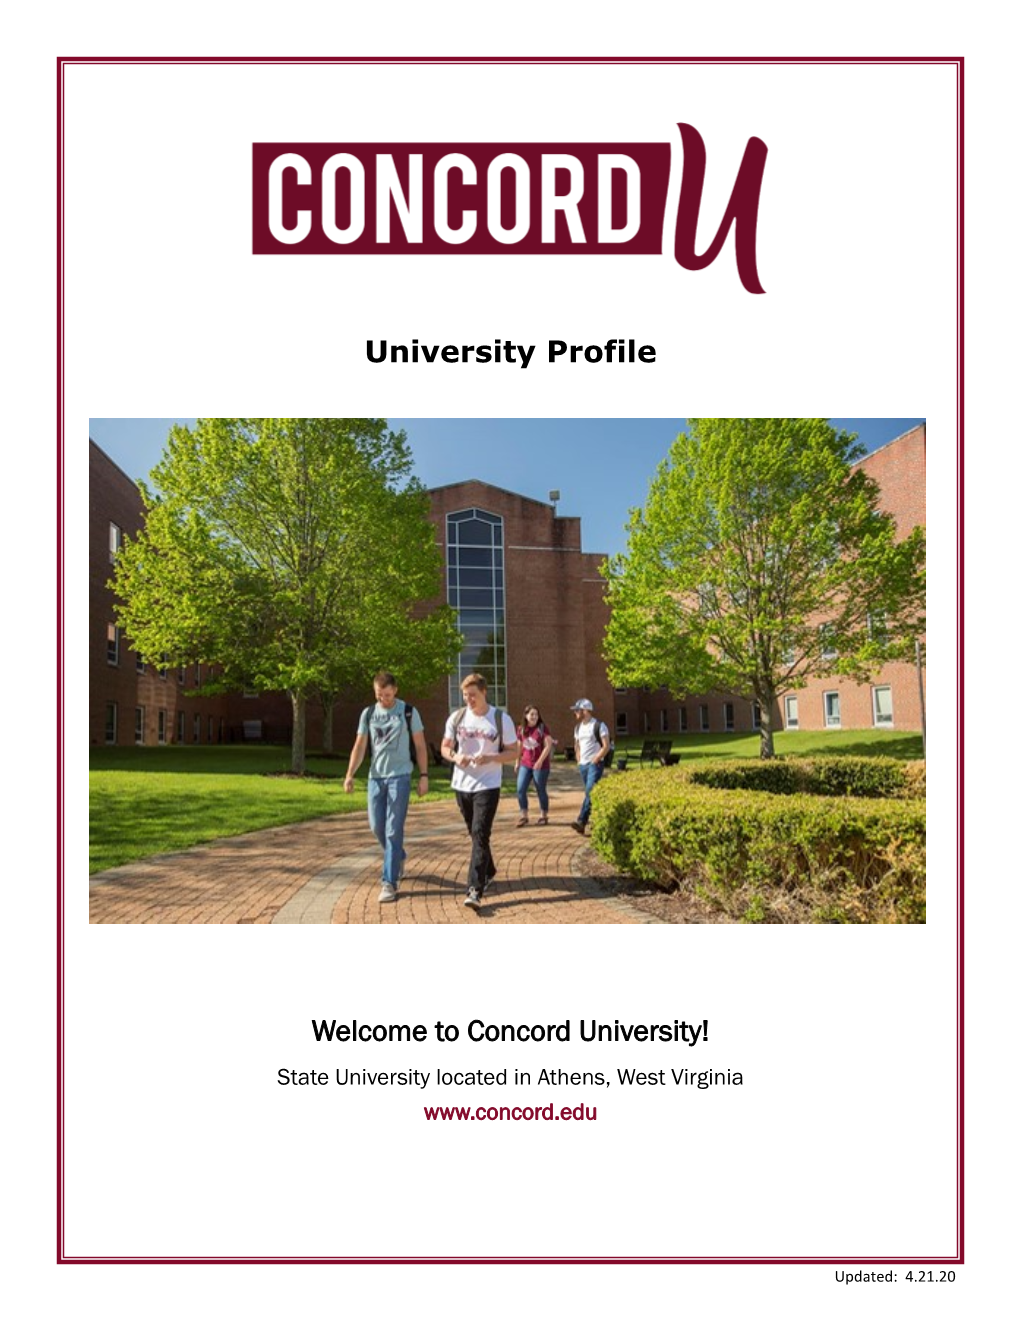 Concord University! State University Located in Athens, West Virginia